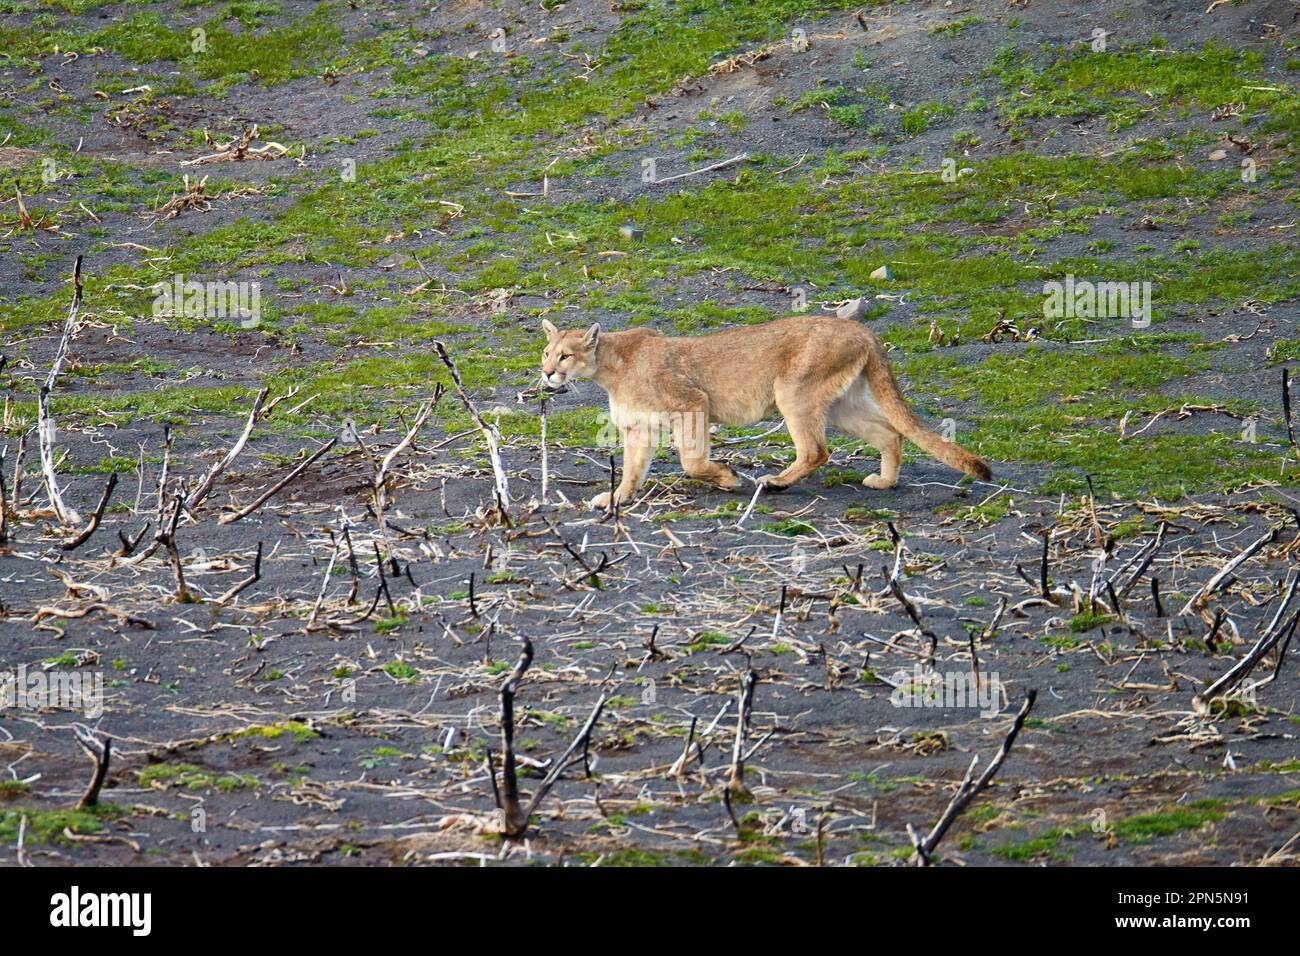 Puma (Puma concolor puma) adult, walking on area burnt during December 2011 great fire, Torres del Paine N. P. Southern Patagonia, Chile Stock Photo